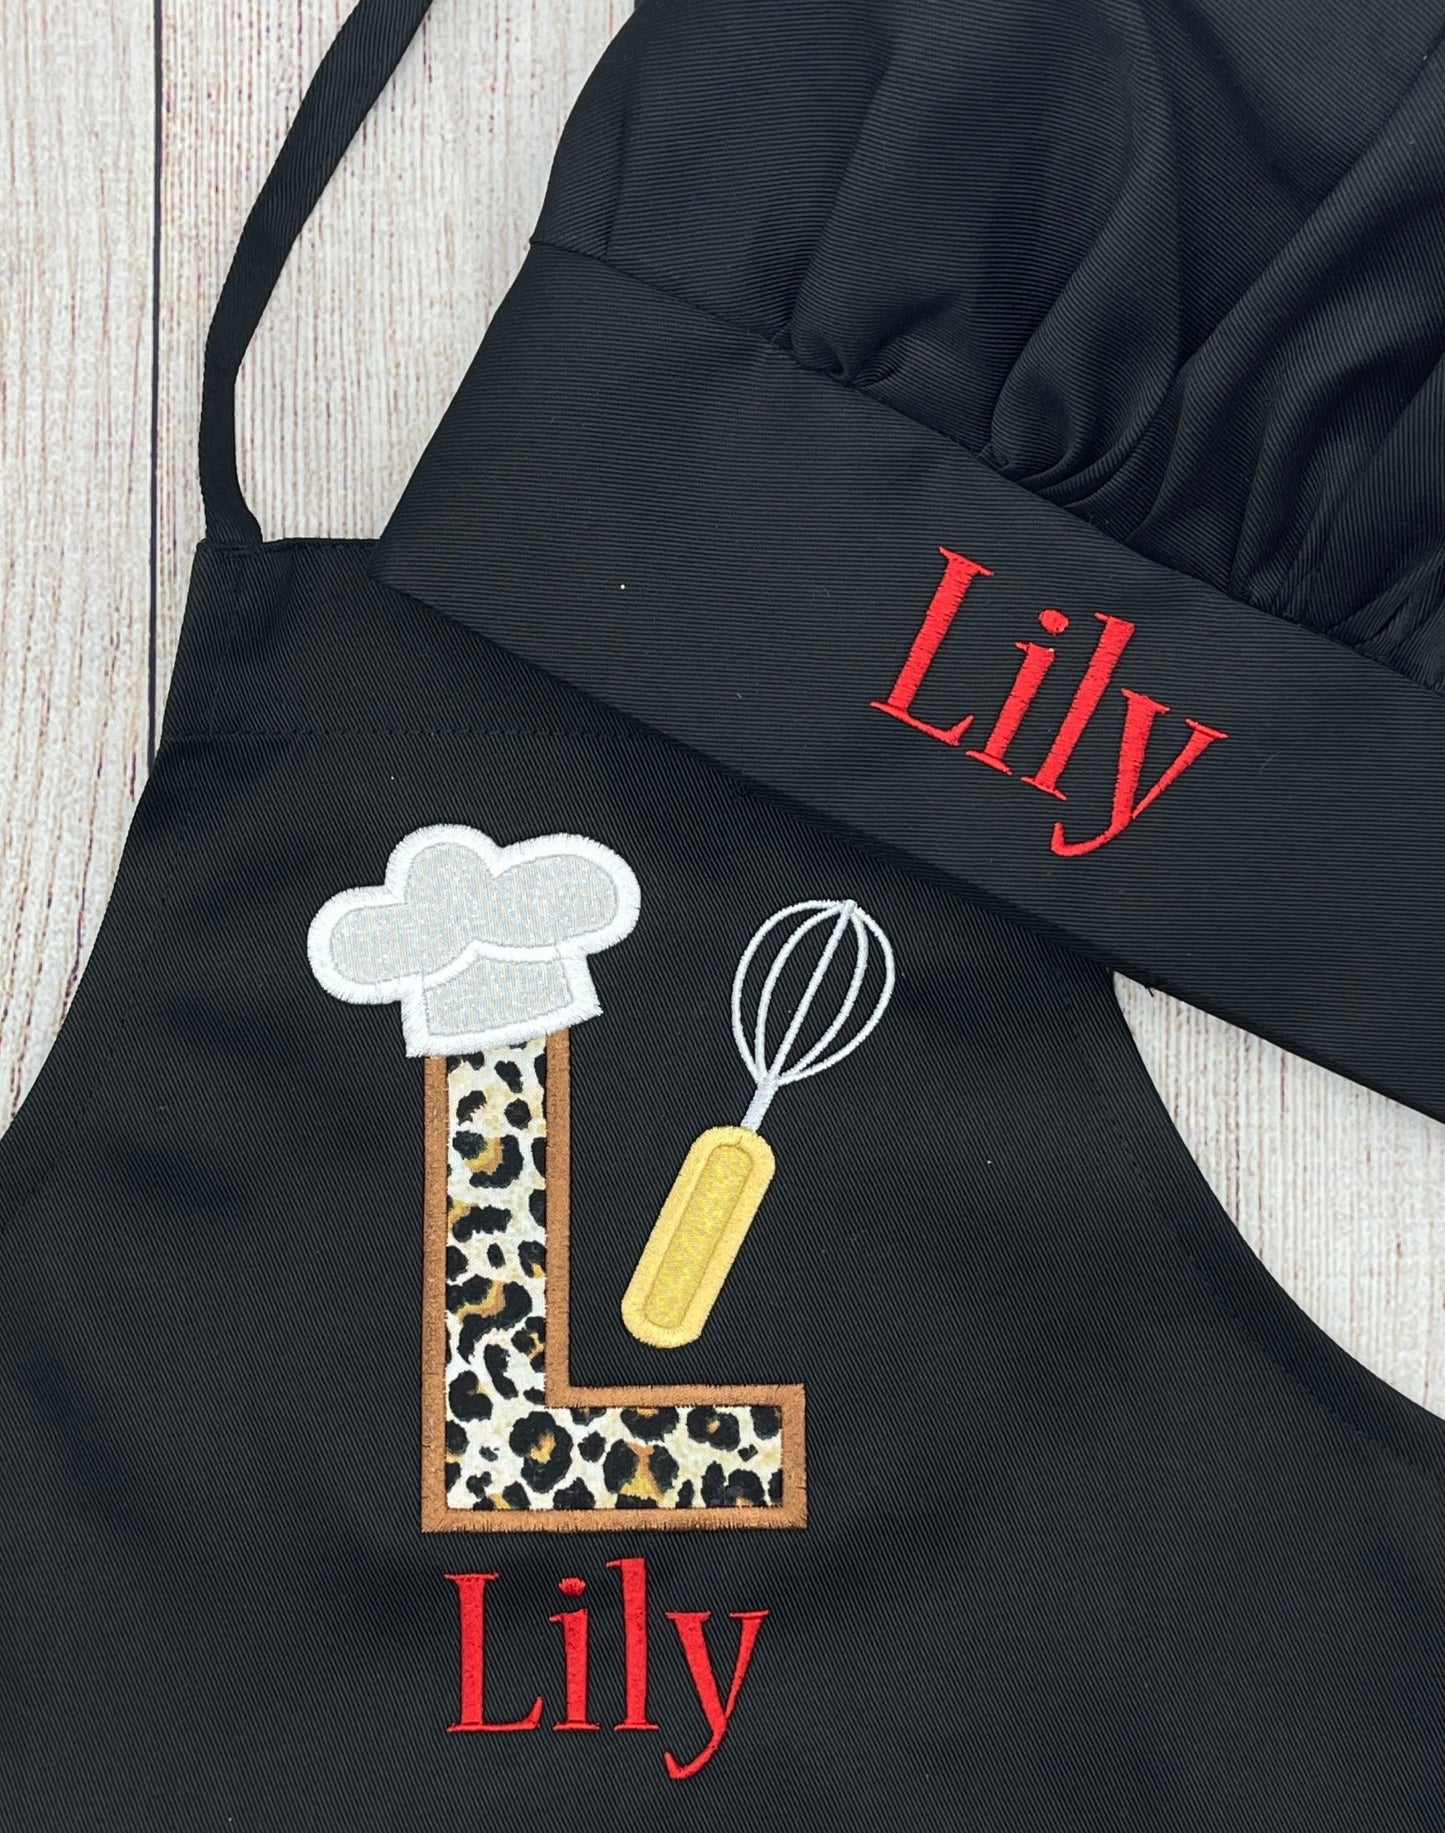 Girls Personalized Embroidered Apron with Animal Print Large initial & name